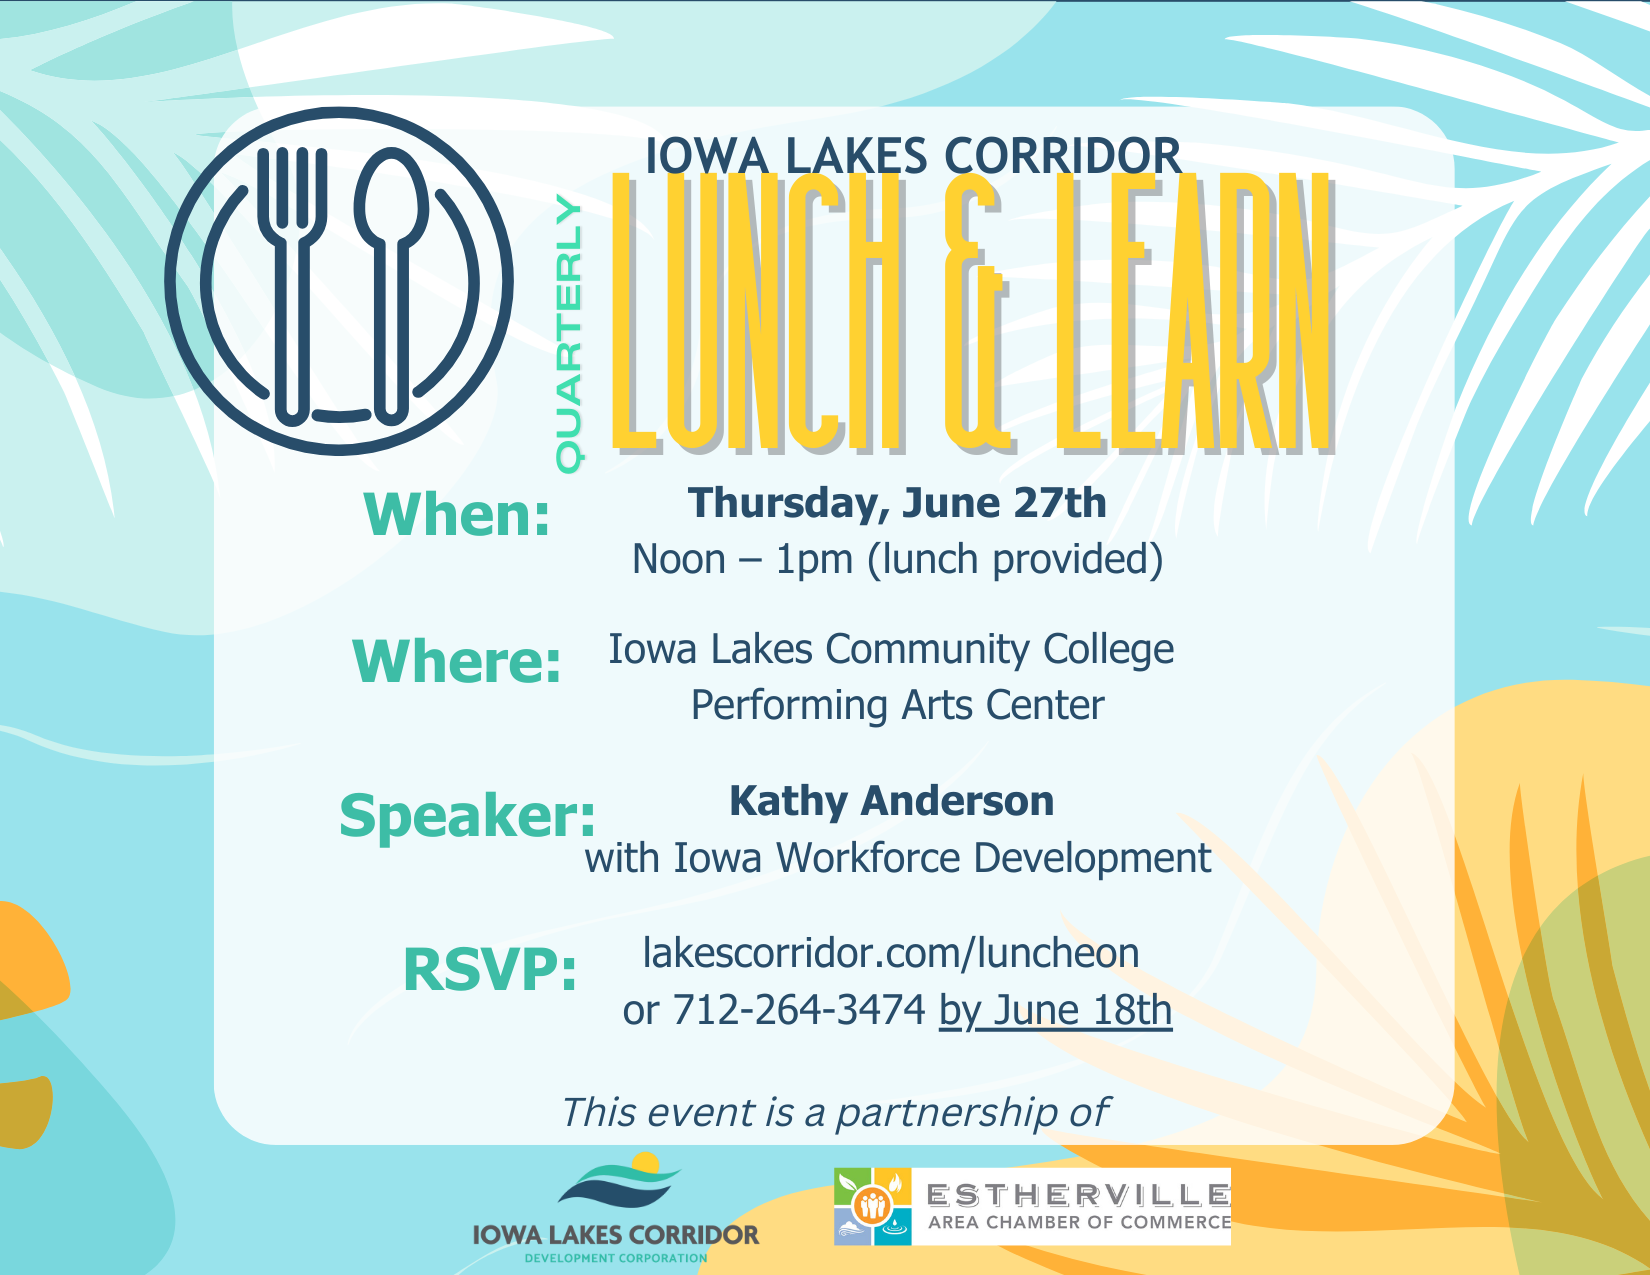 Corridor to host Workforce Lunch & Learn in partnership with the Estherville Chamber Photo